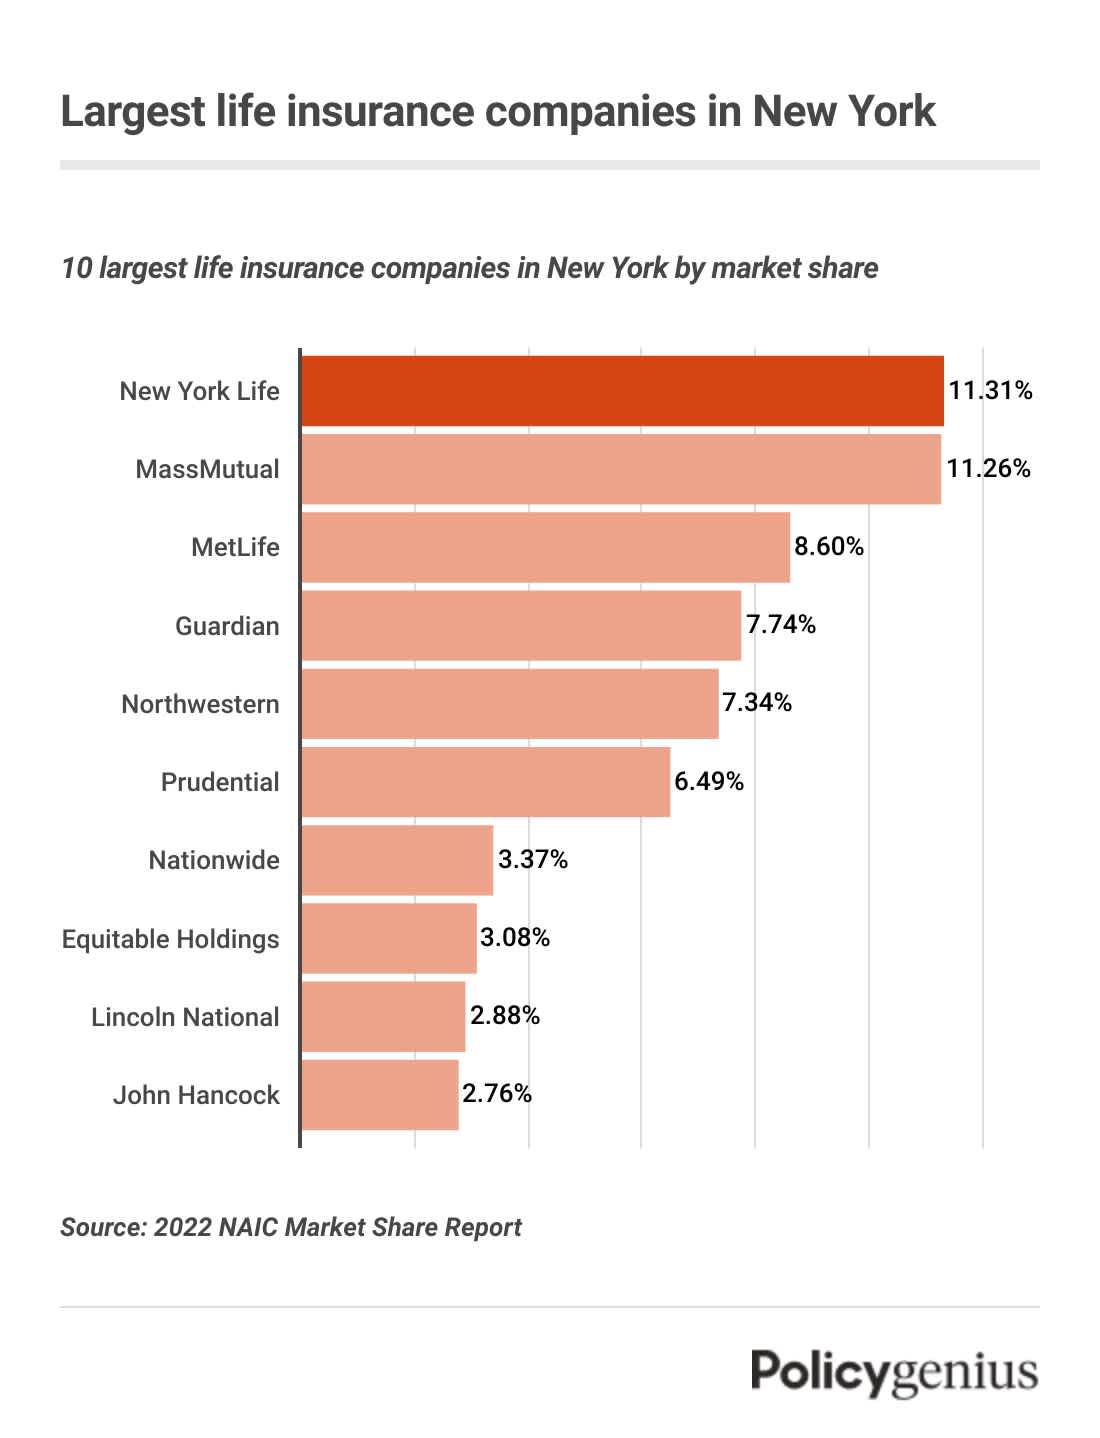 A graphic showing the largest insurance companies in New York by market share.